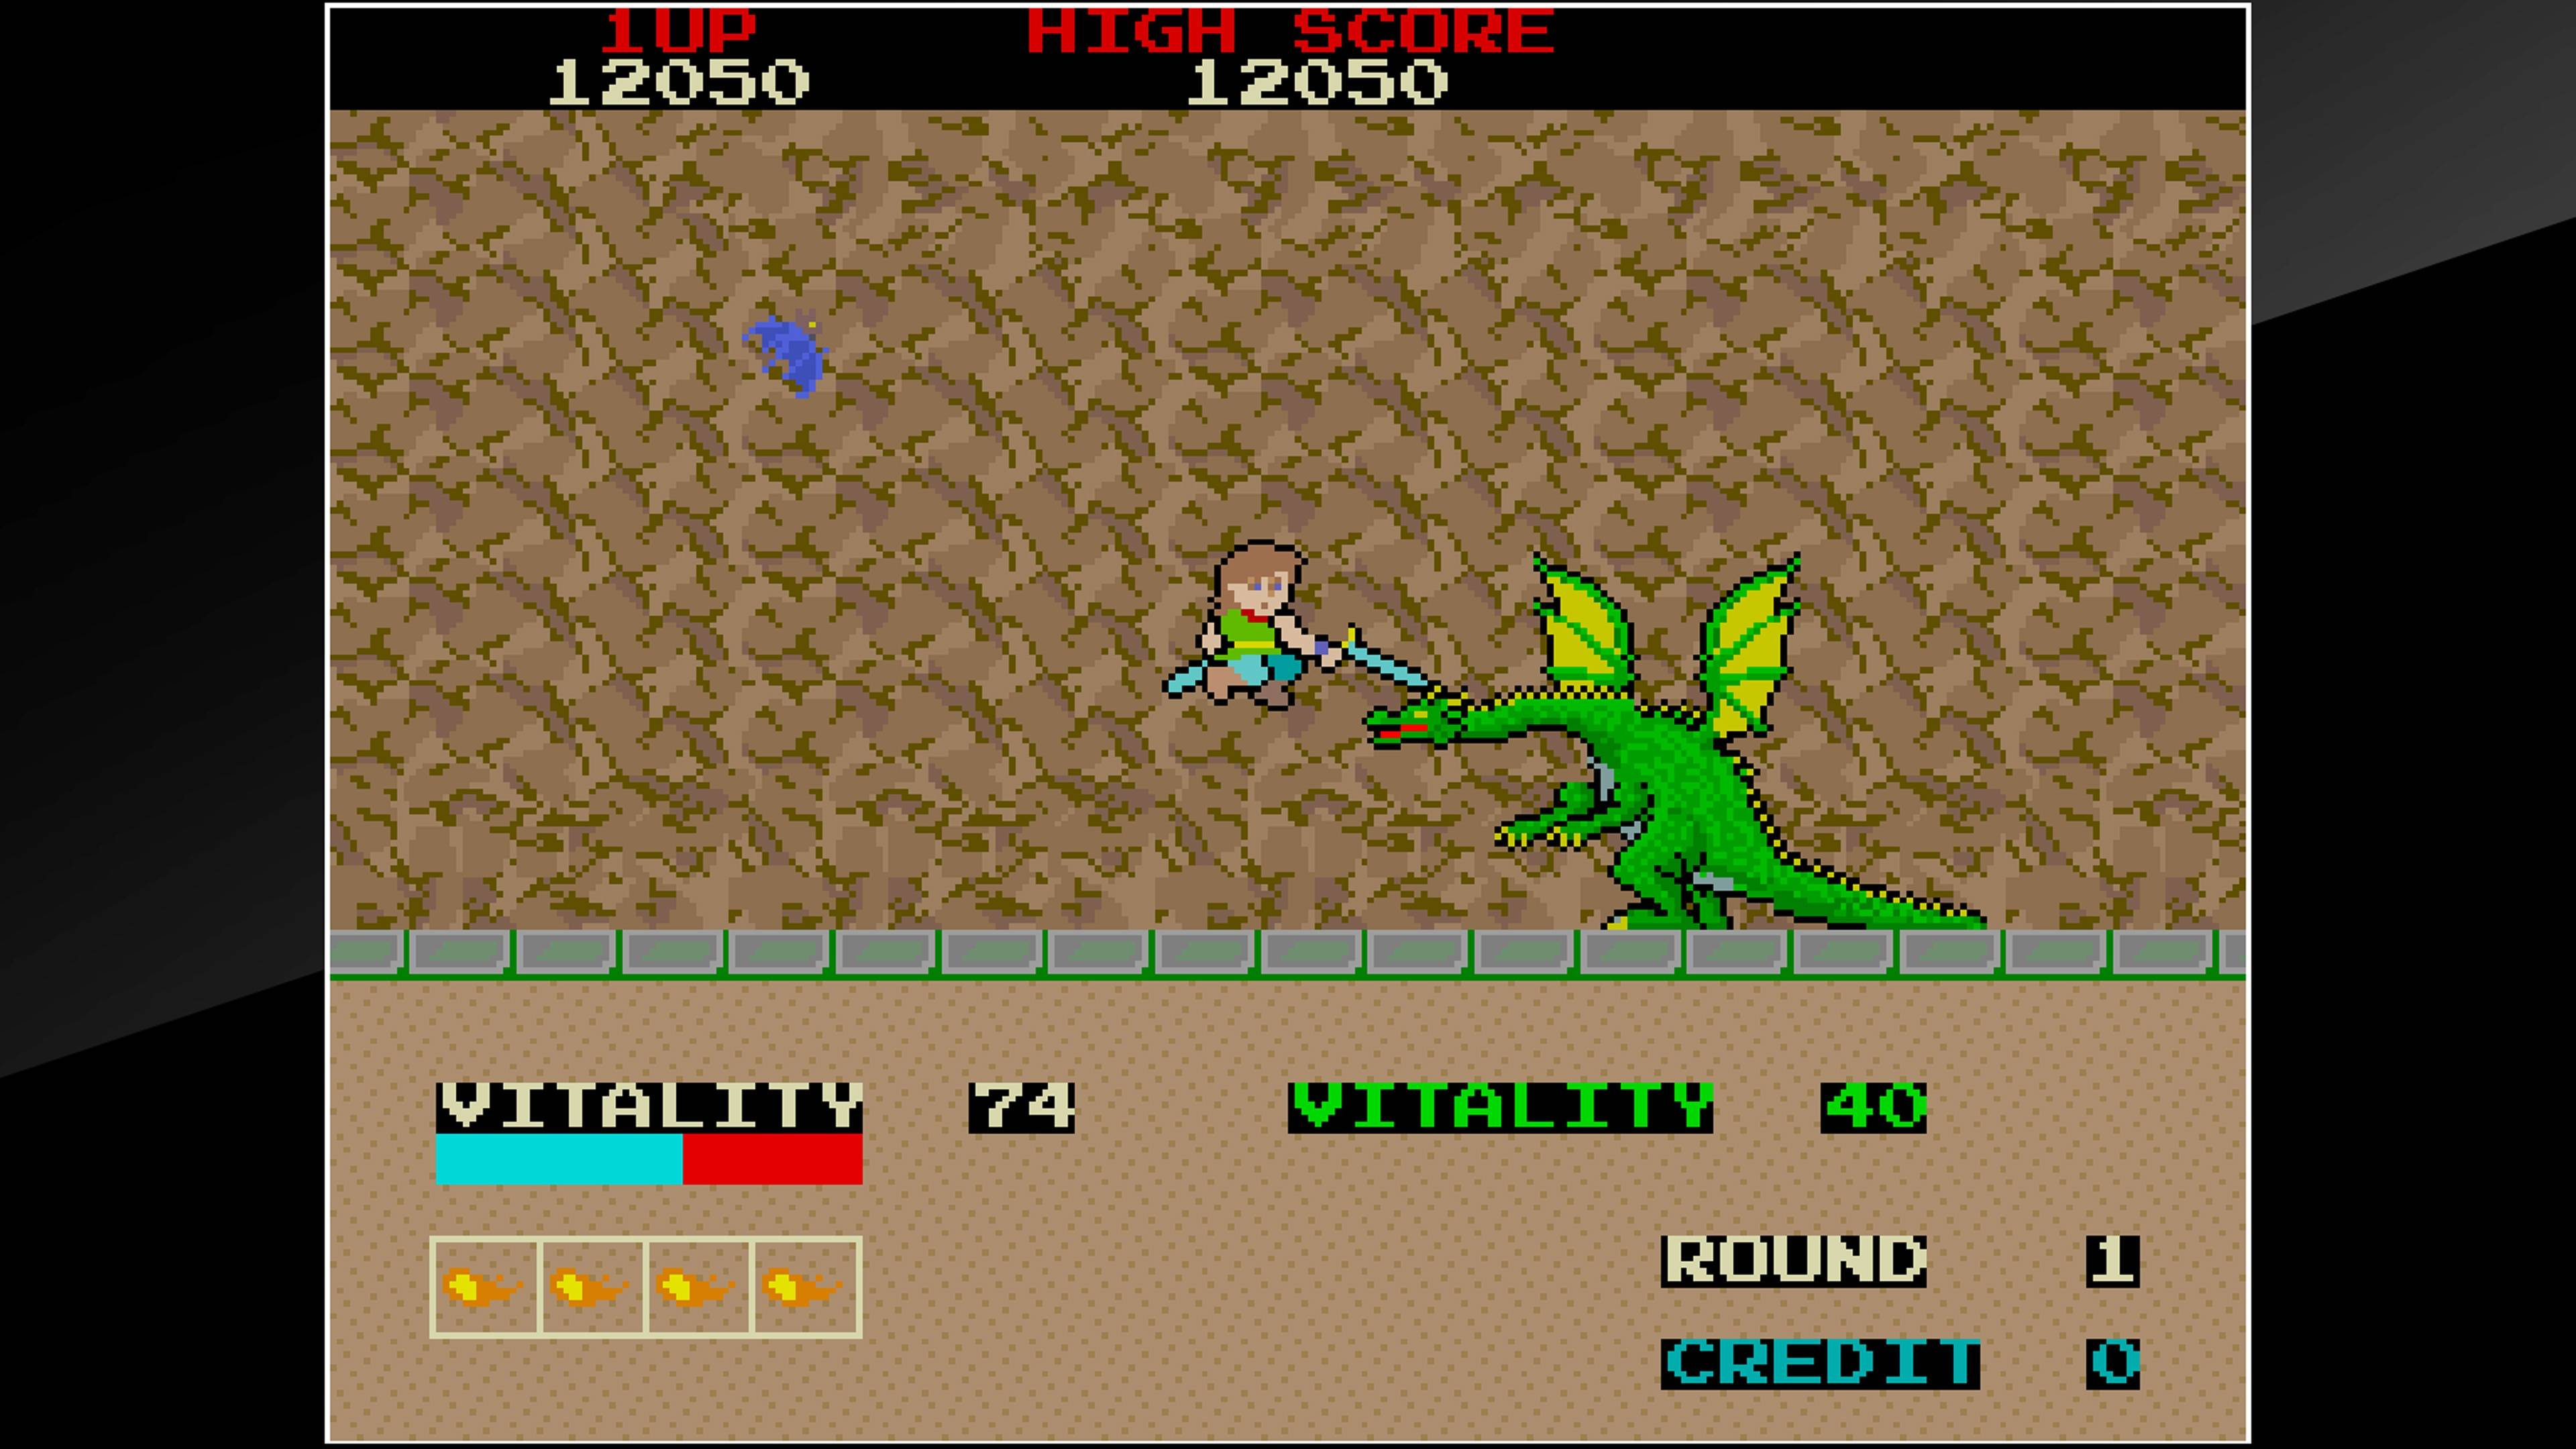 Arcade Archives DRAGON BUSTER